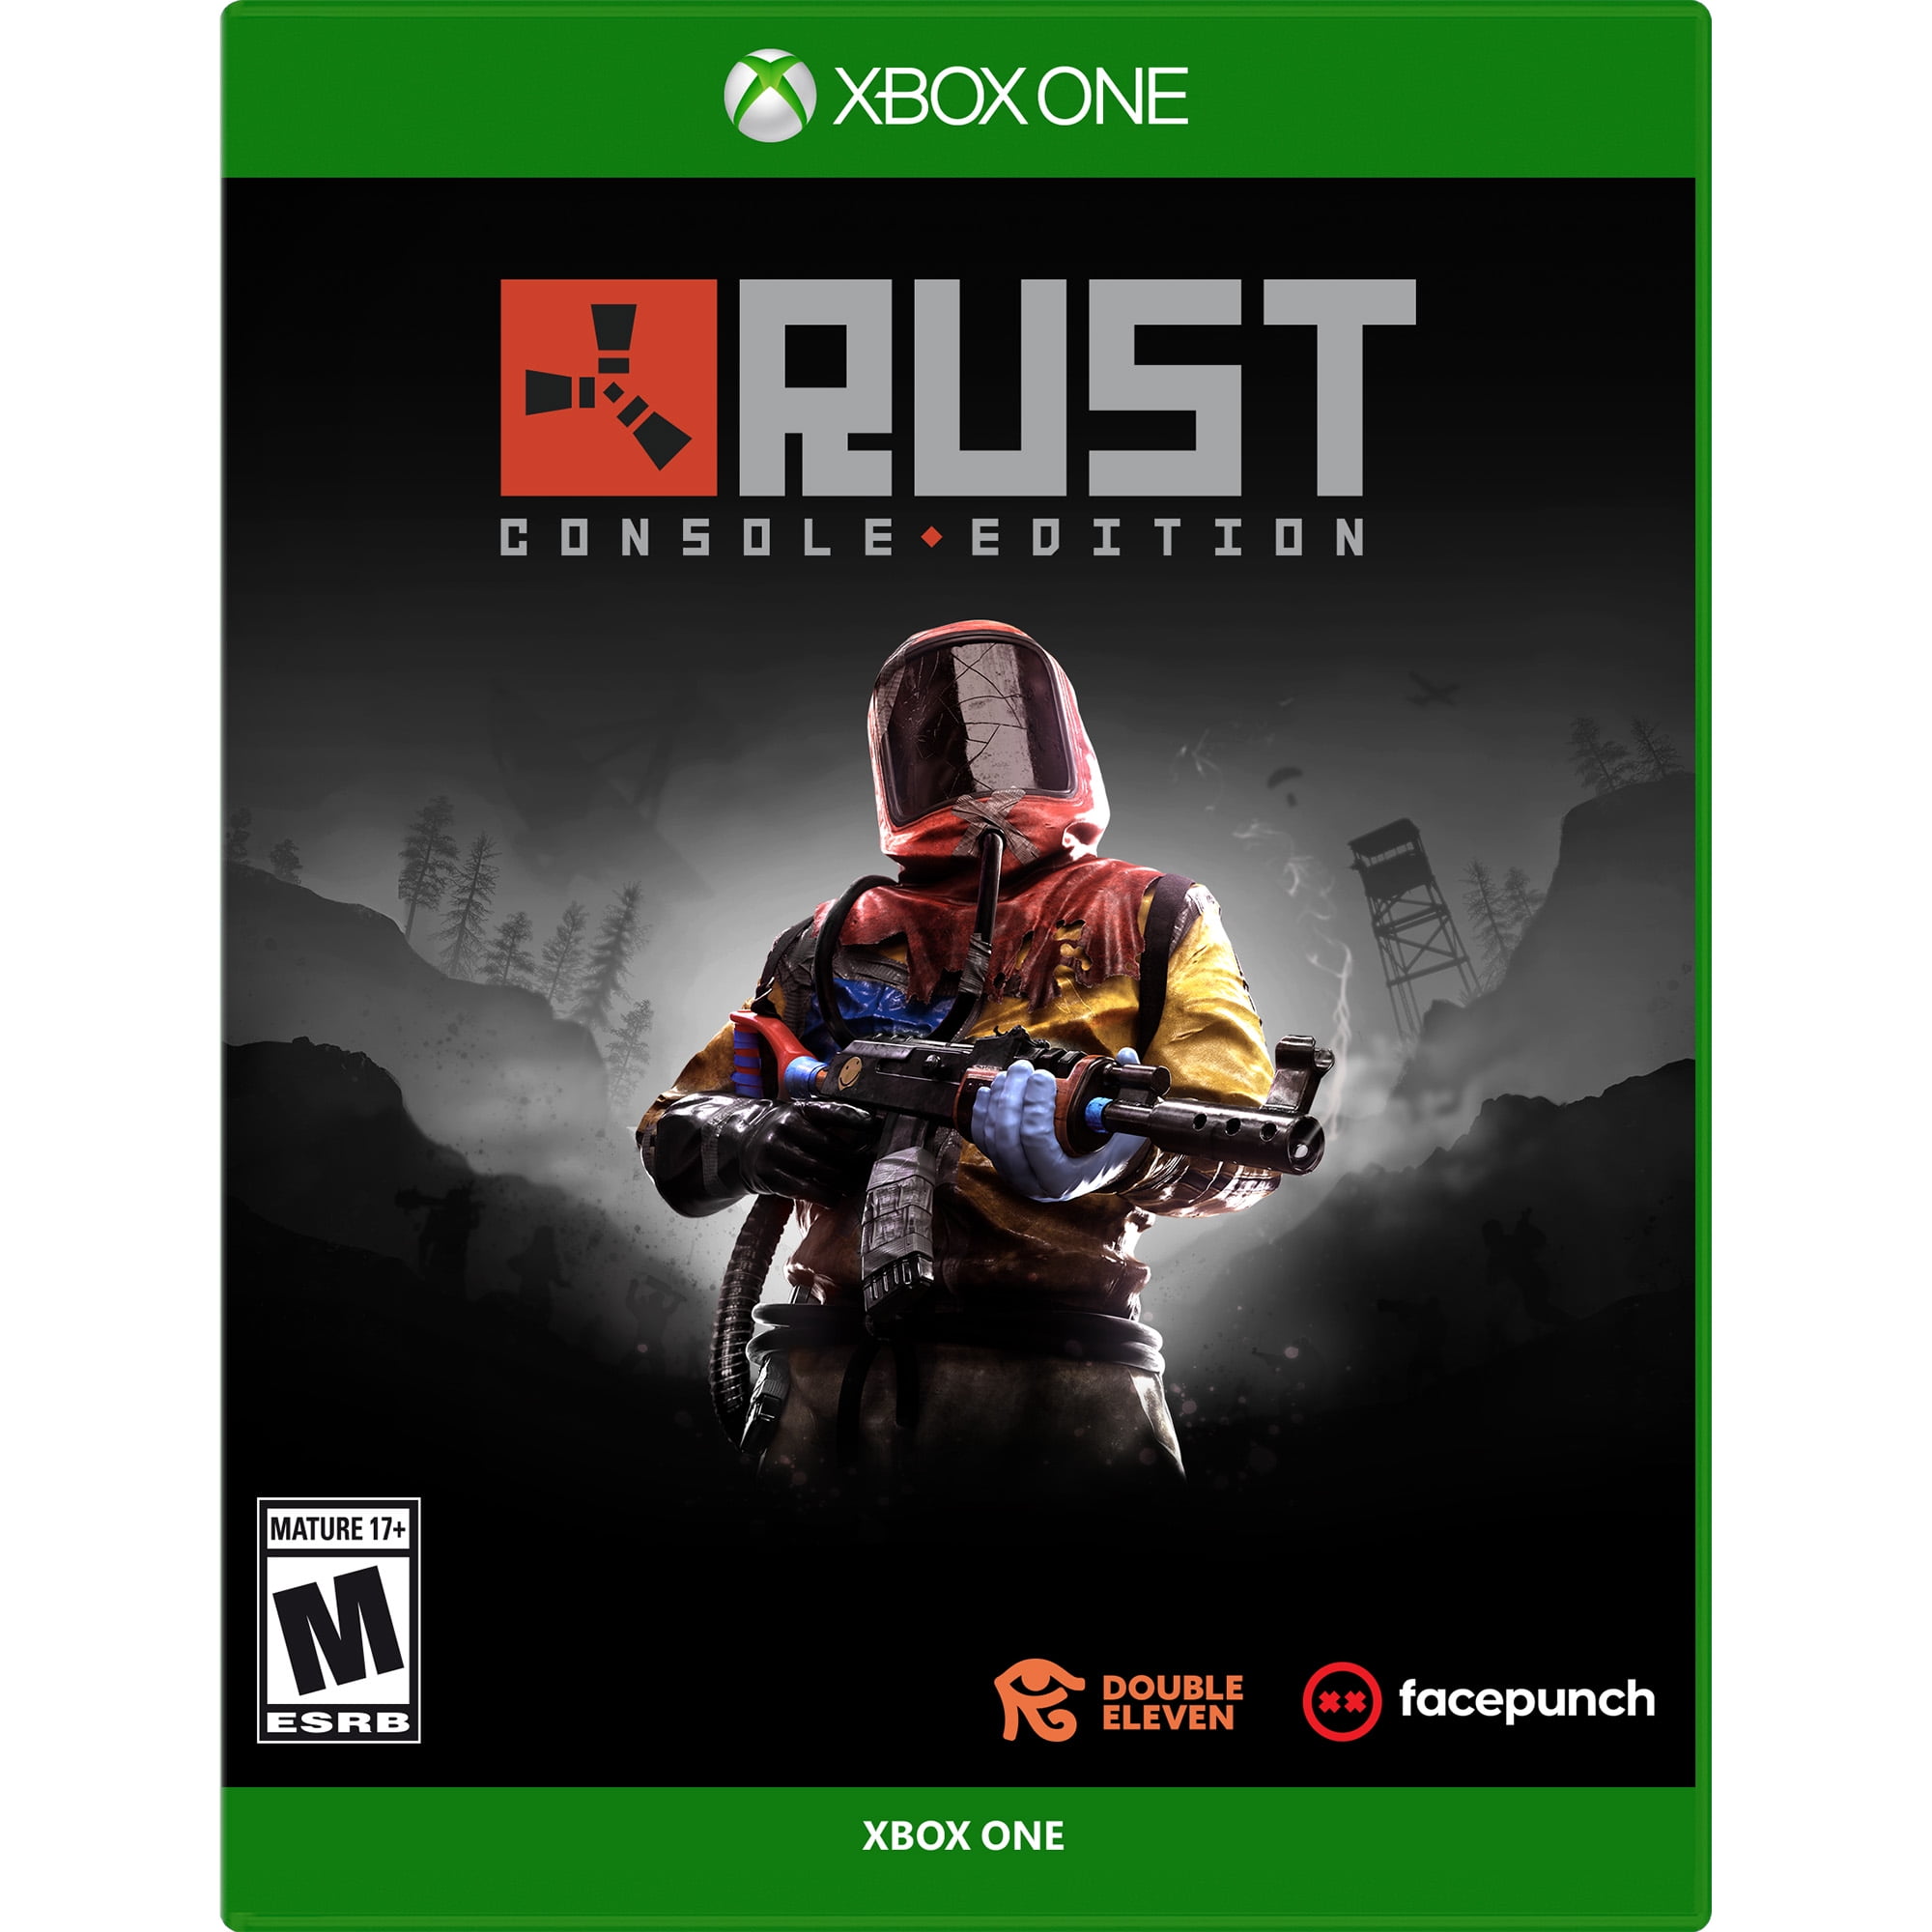 Rust Console Edition Review